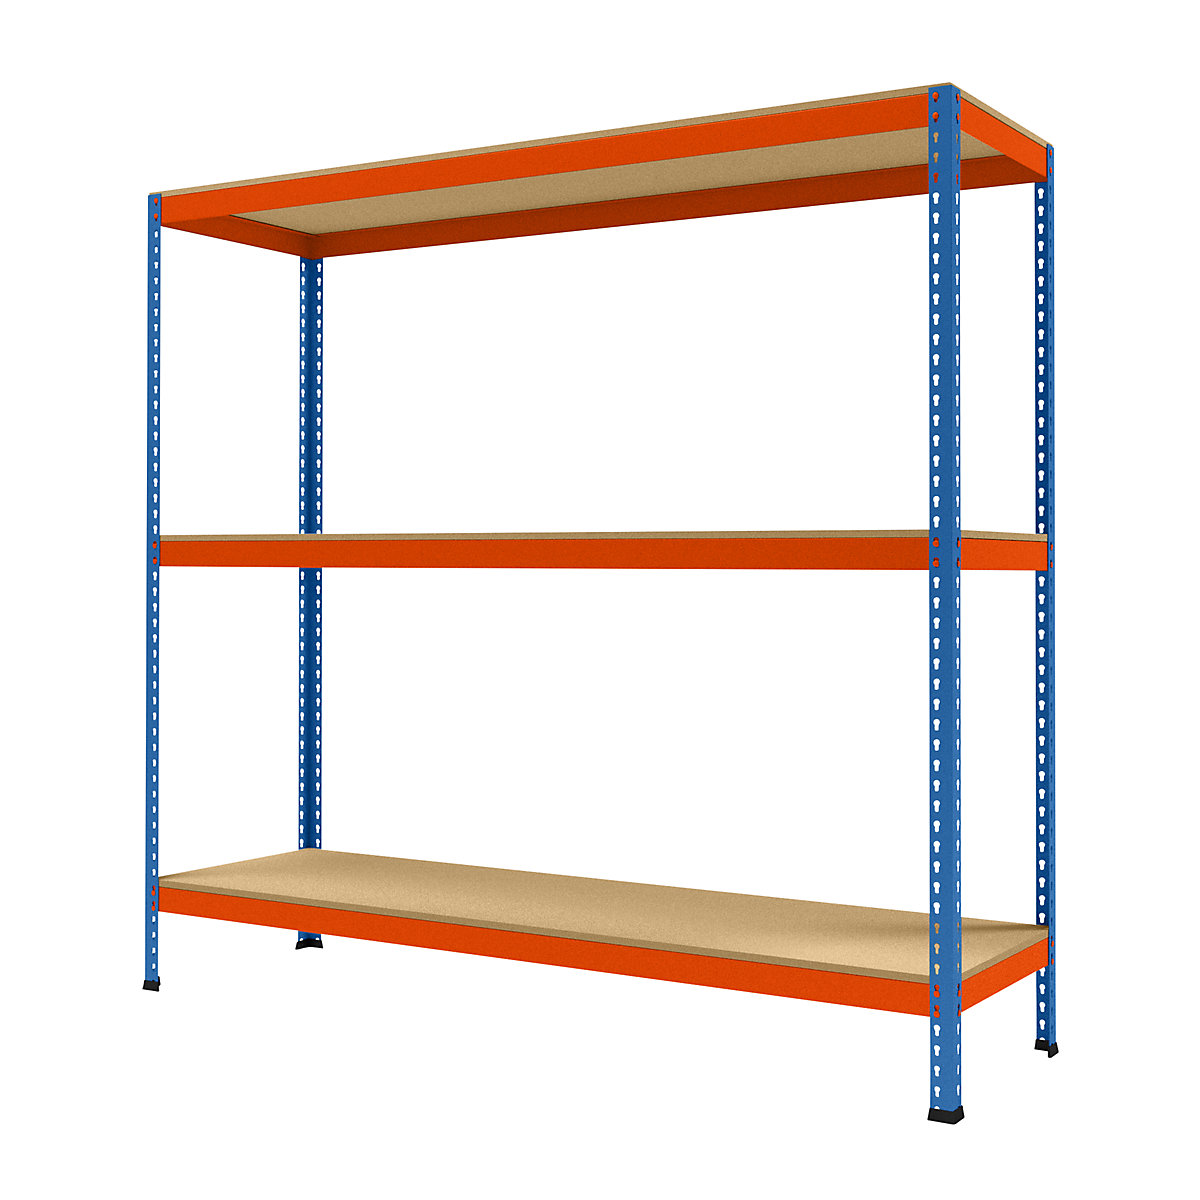 Wide span heavy duty shelving, height 1981 mm, overall depth 621 mm, width 2146 mm-5